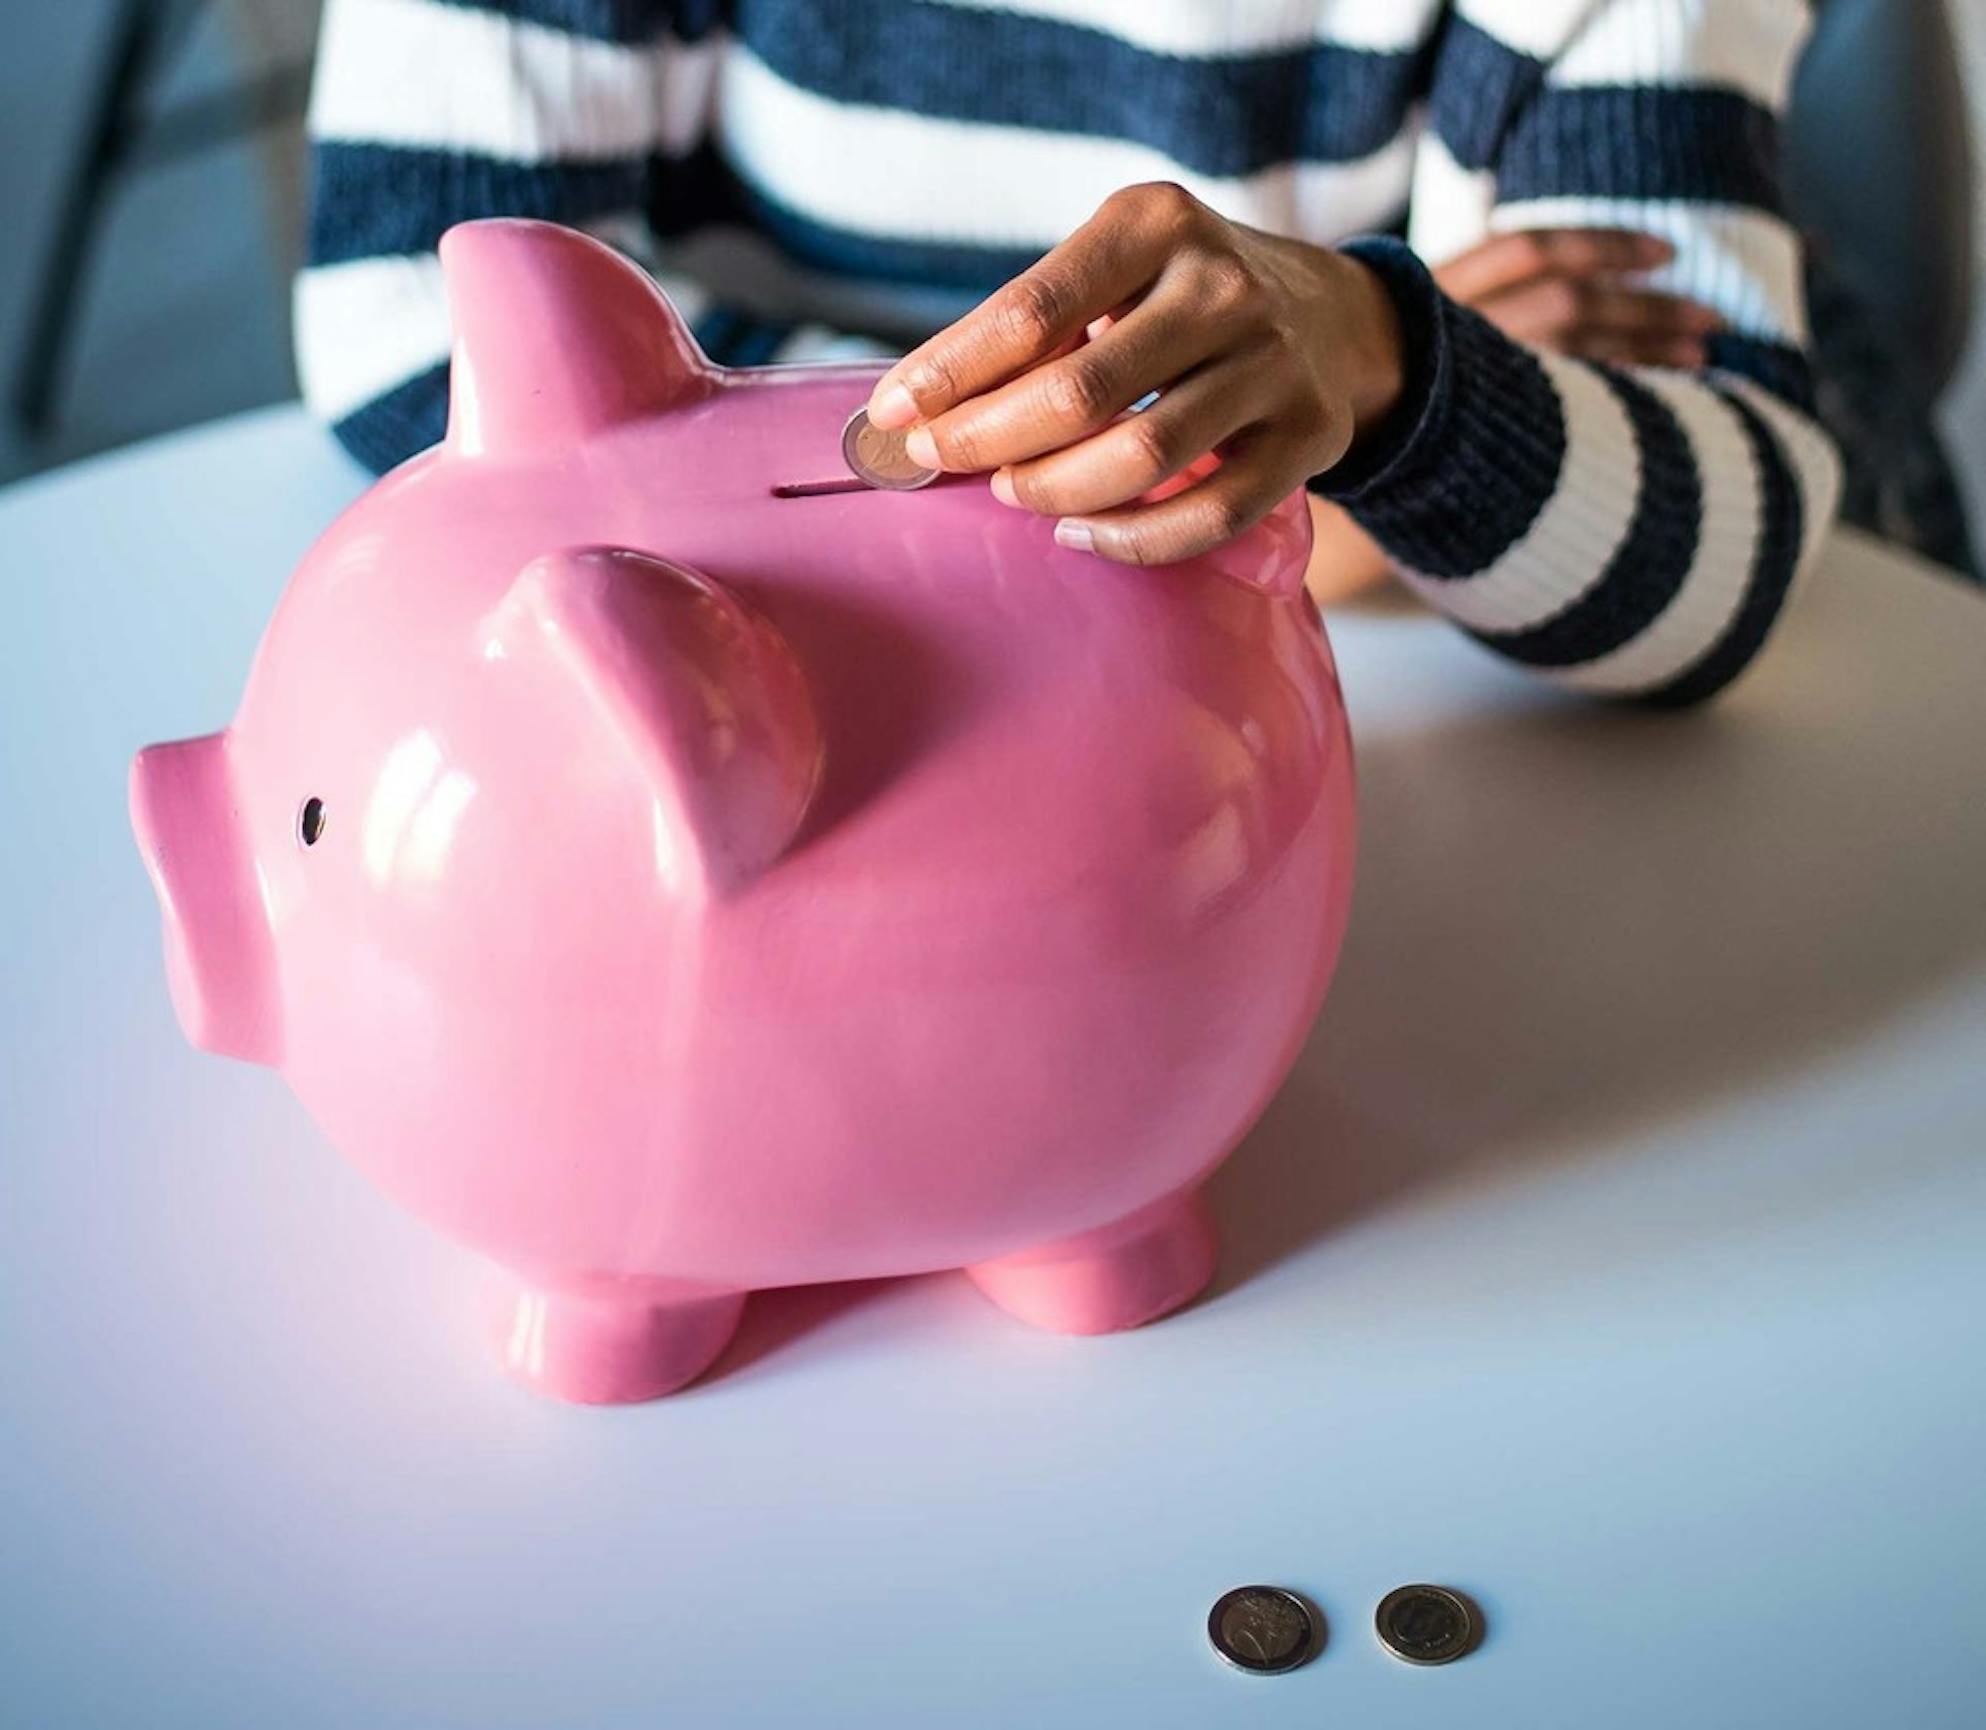 Woman sitting at a table saving money each month by putting coins into a piggy bank